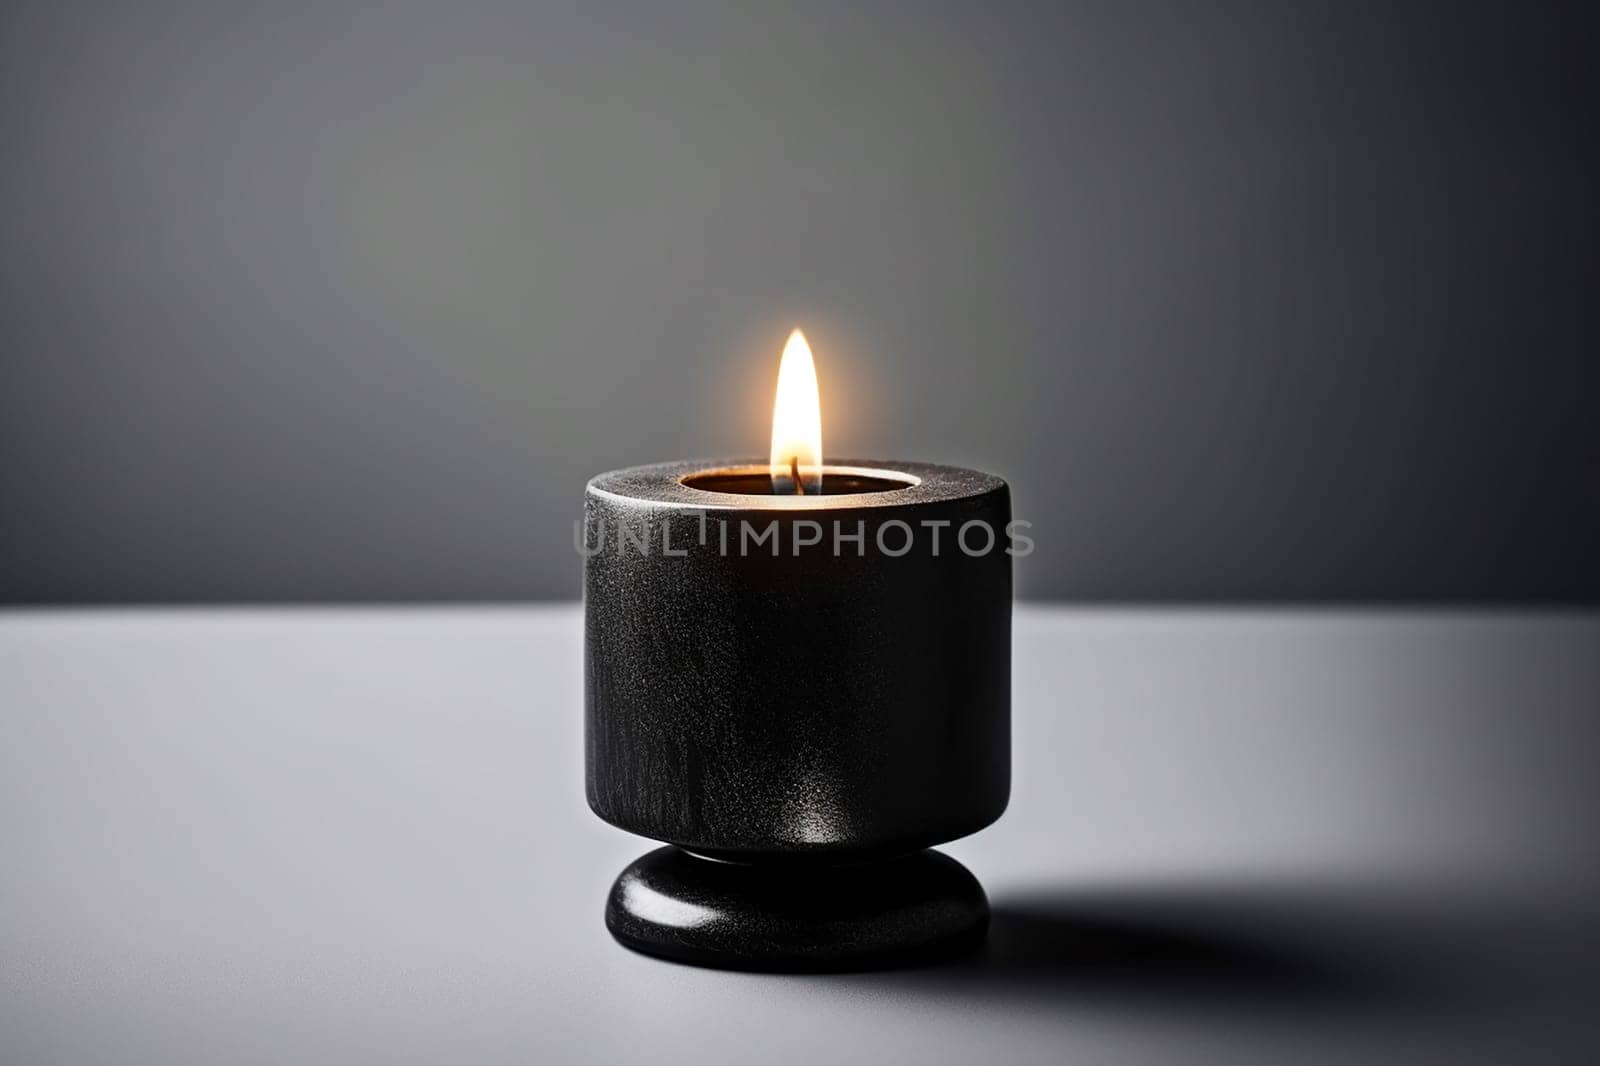 A single lit candle in a black holder against a grey background.